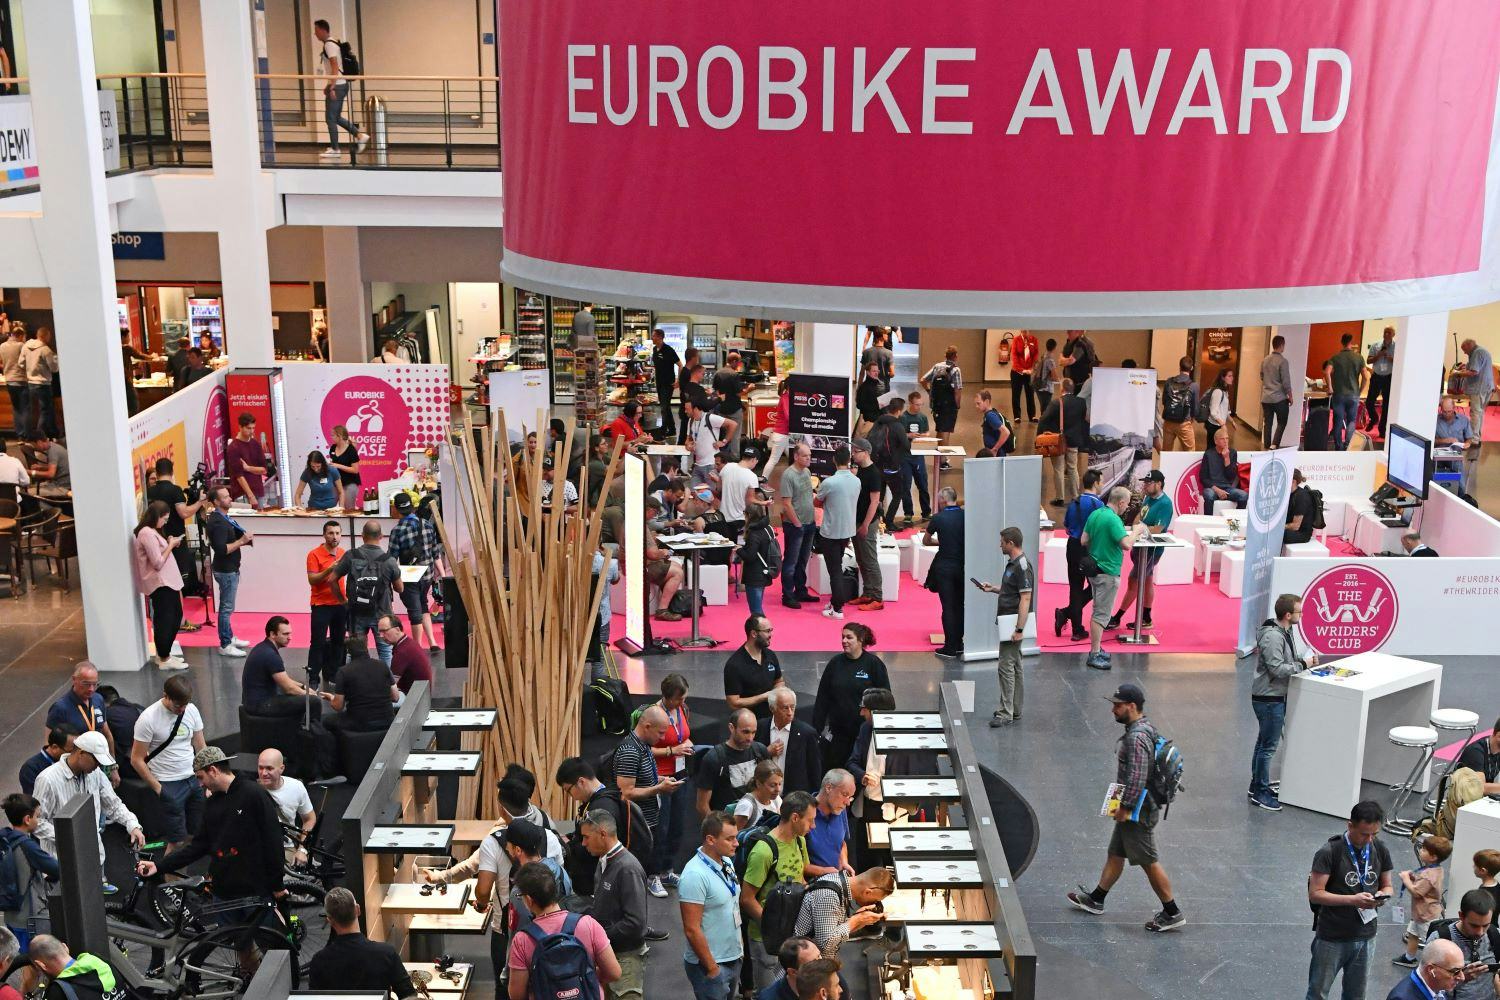 Winners of a Eurobike Award benefit from prominent positioning at the heart of the trade fair. – Photo Eurobike